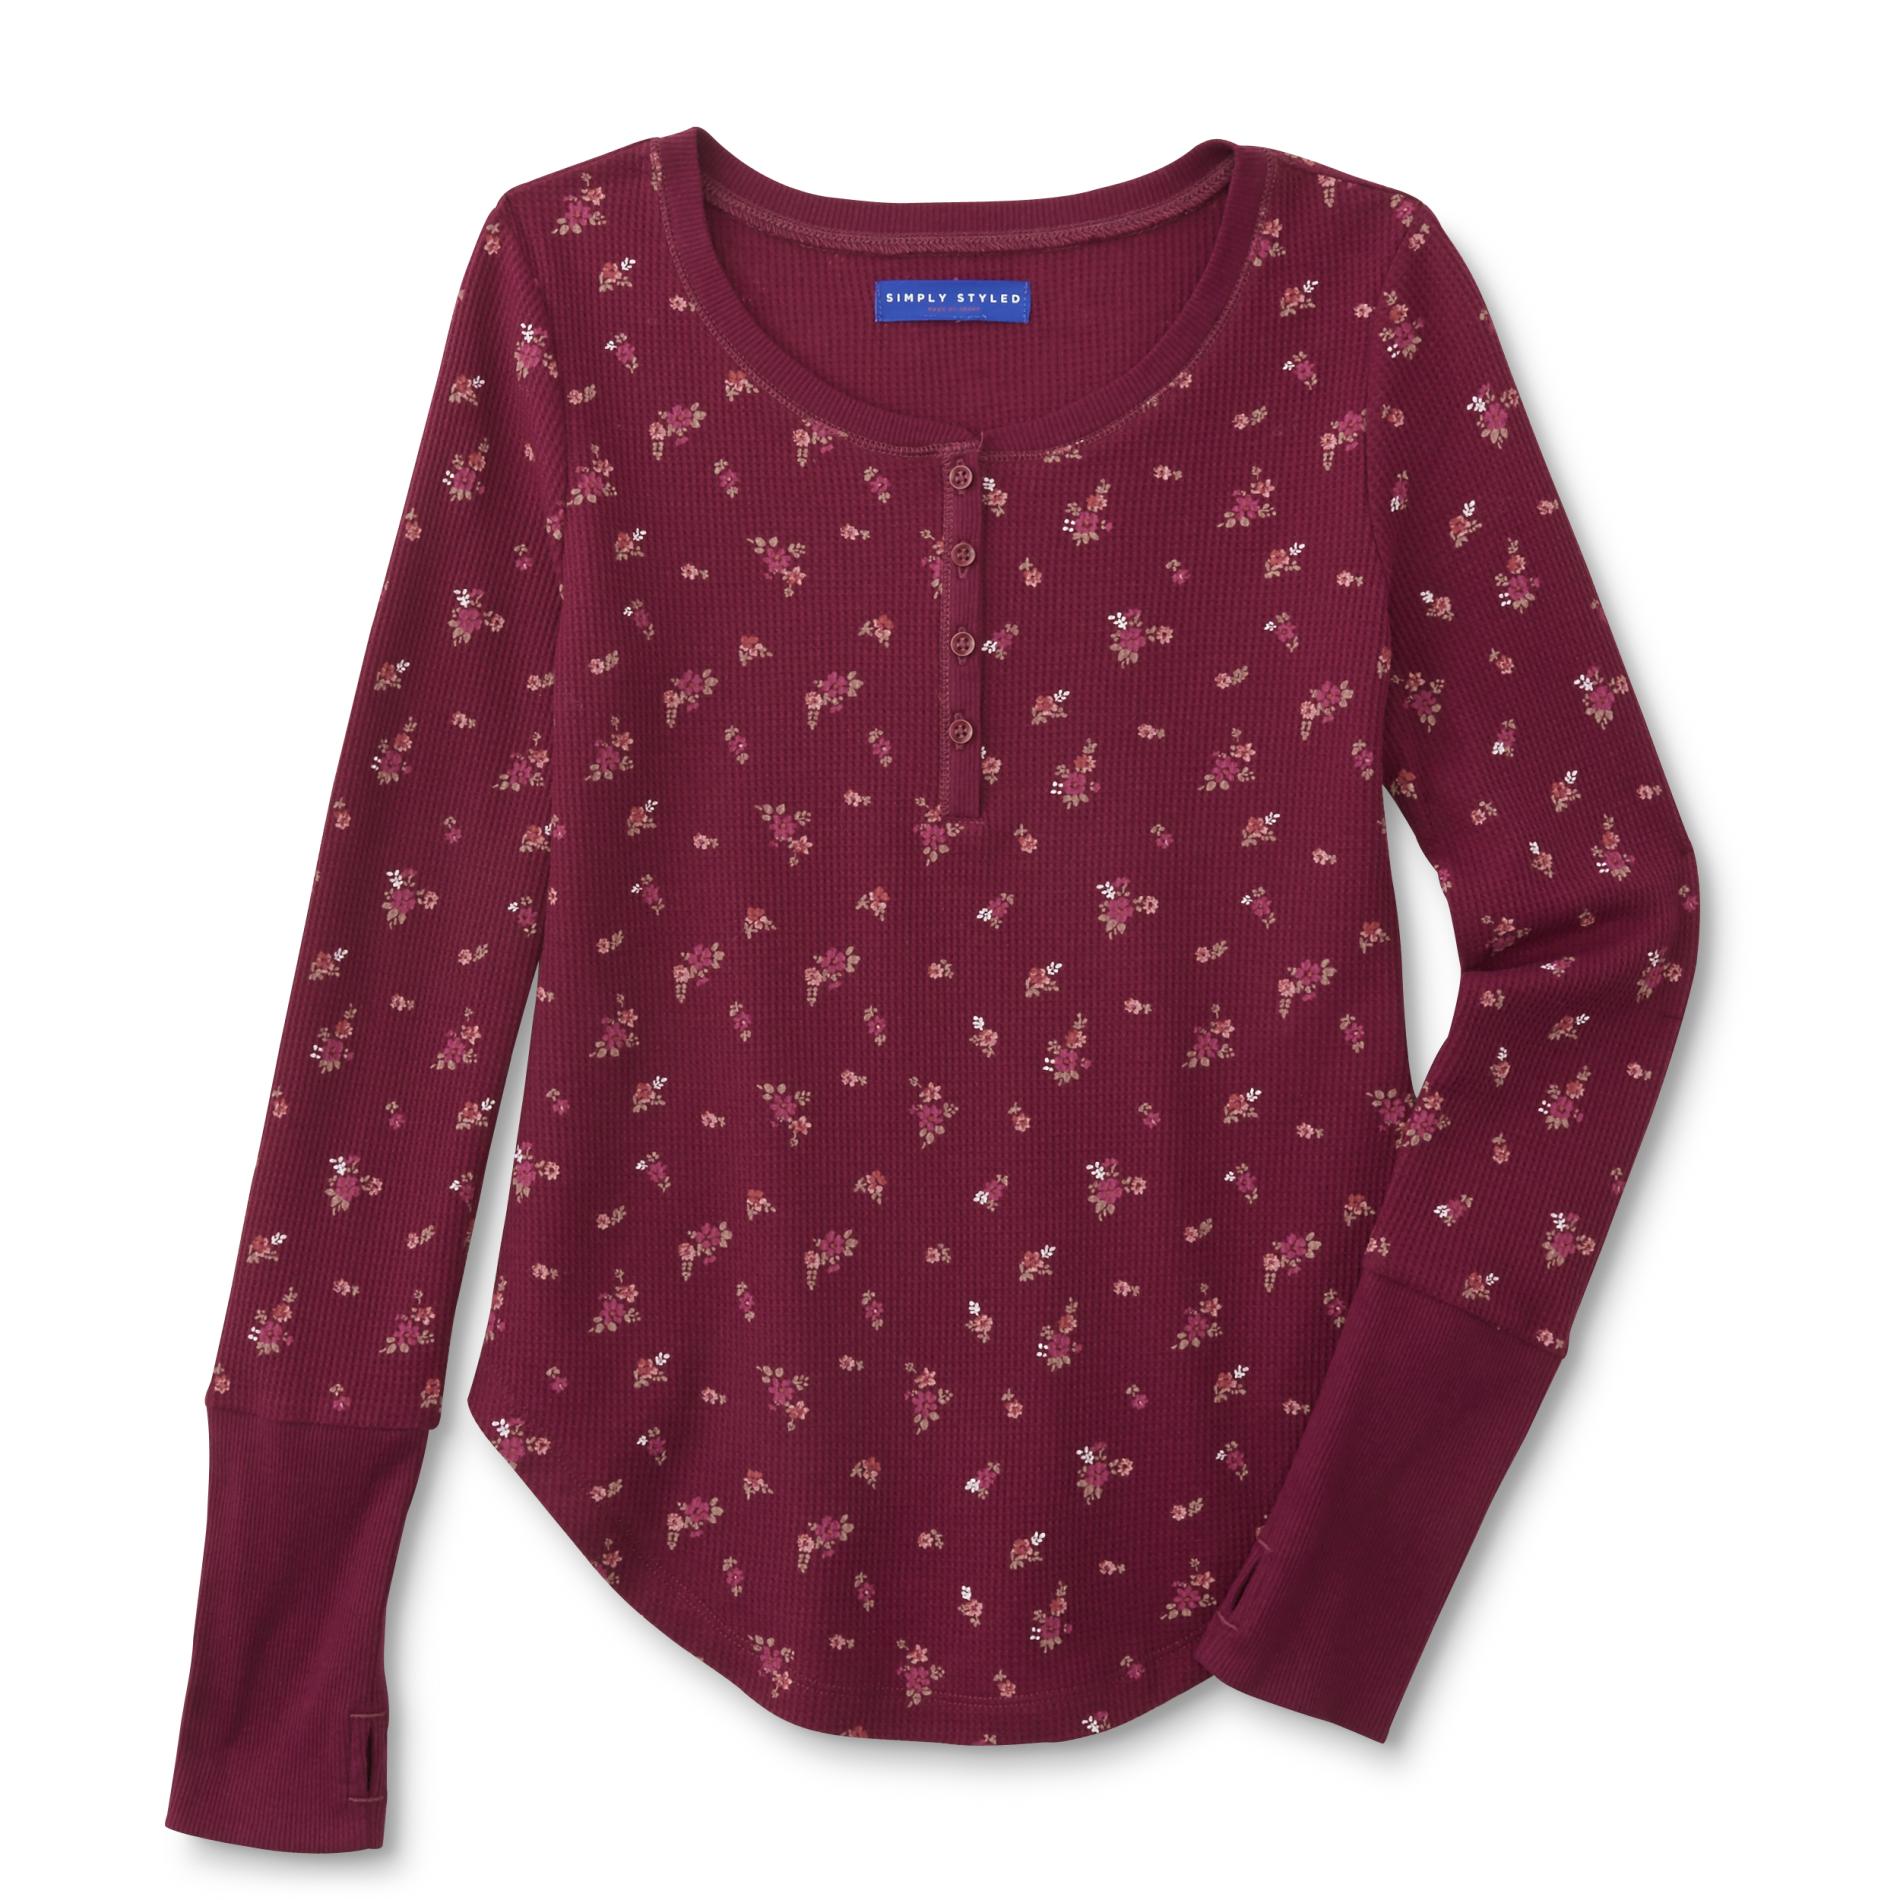 Simply Styled Girl's Thermal Henley - Floral